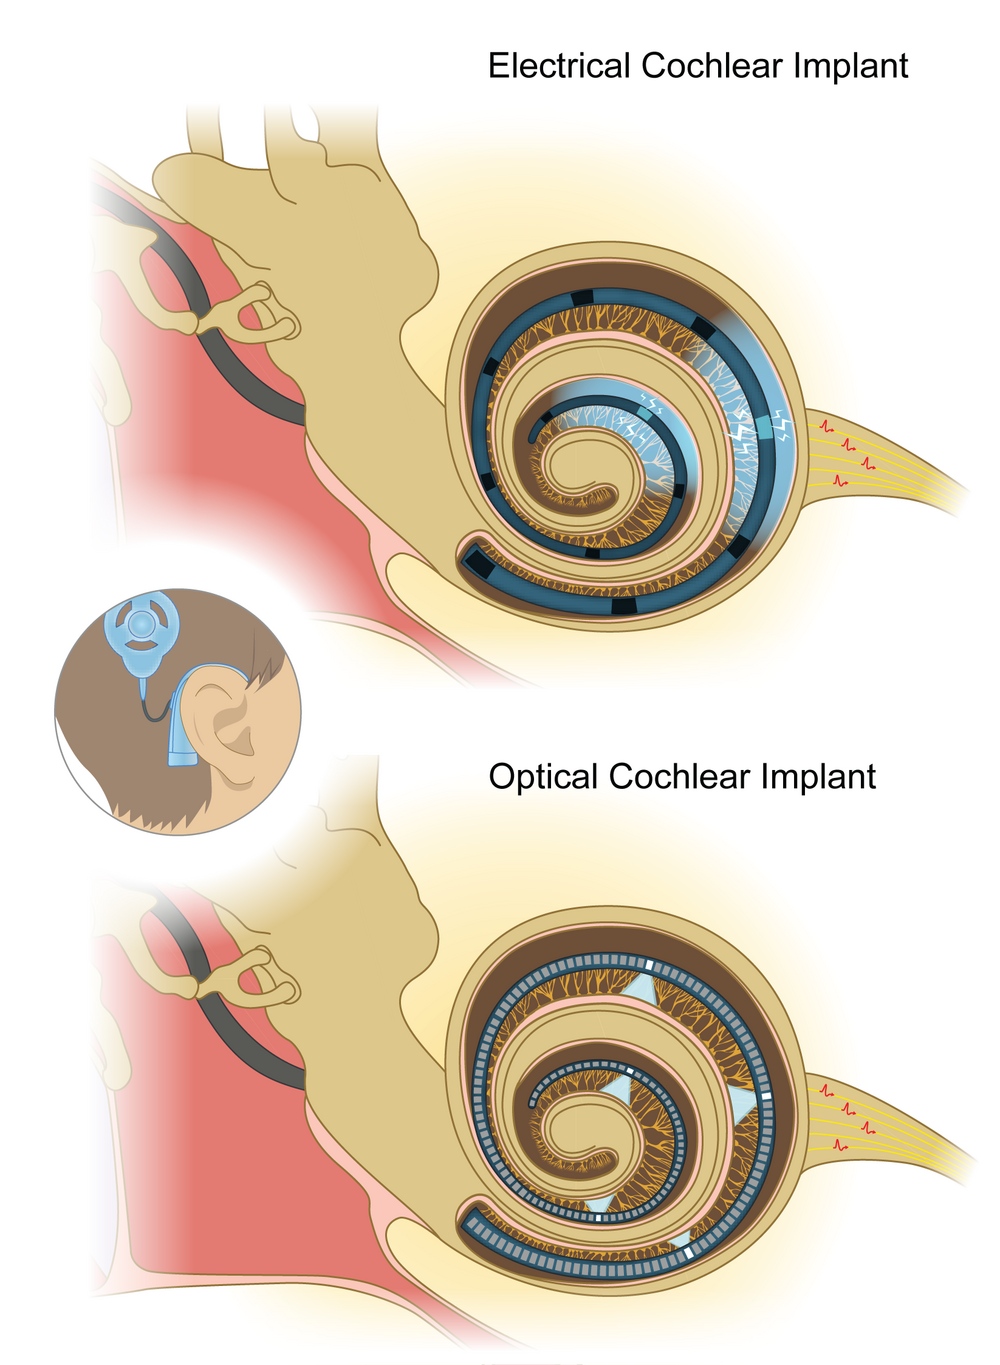 An optical cochlear implant compared with an electrical cochlear implant.